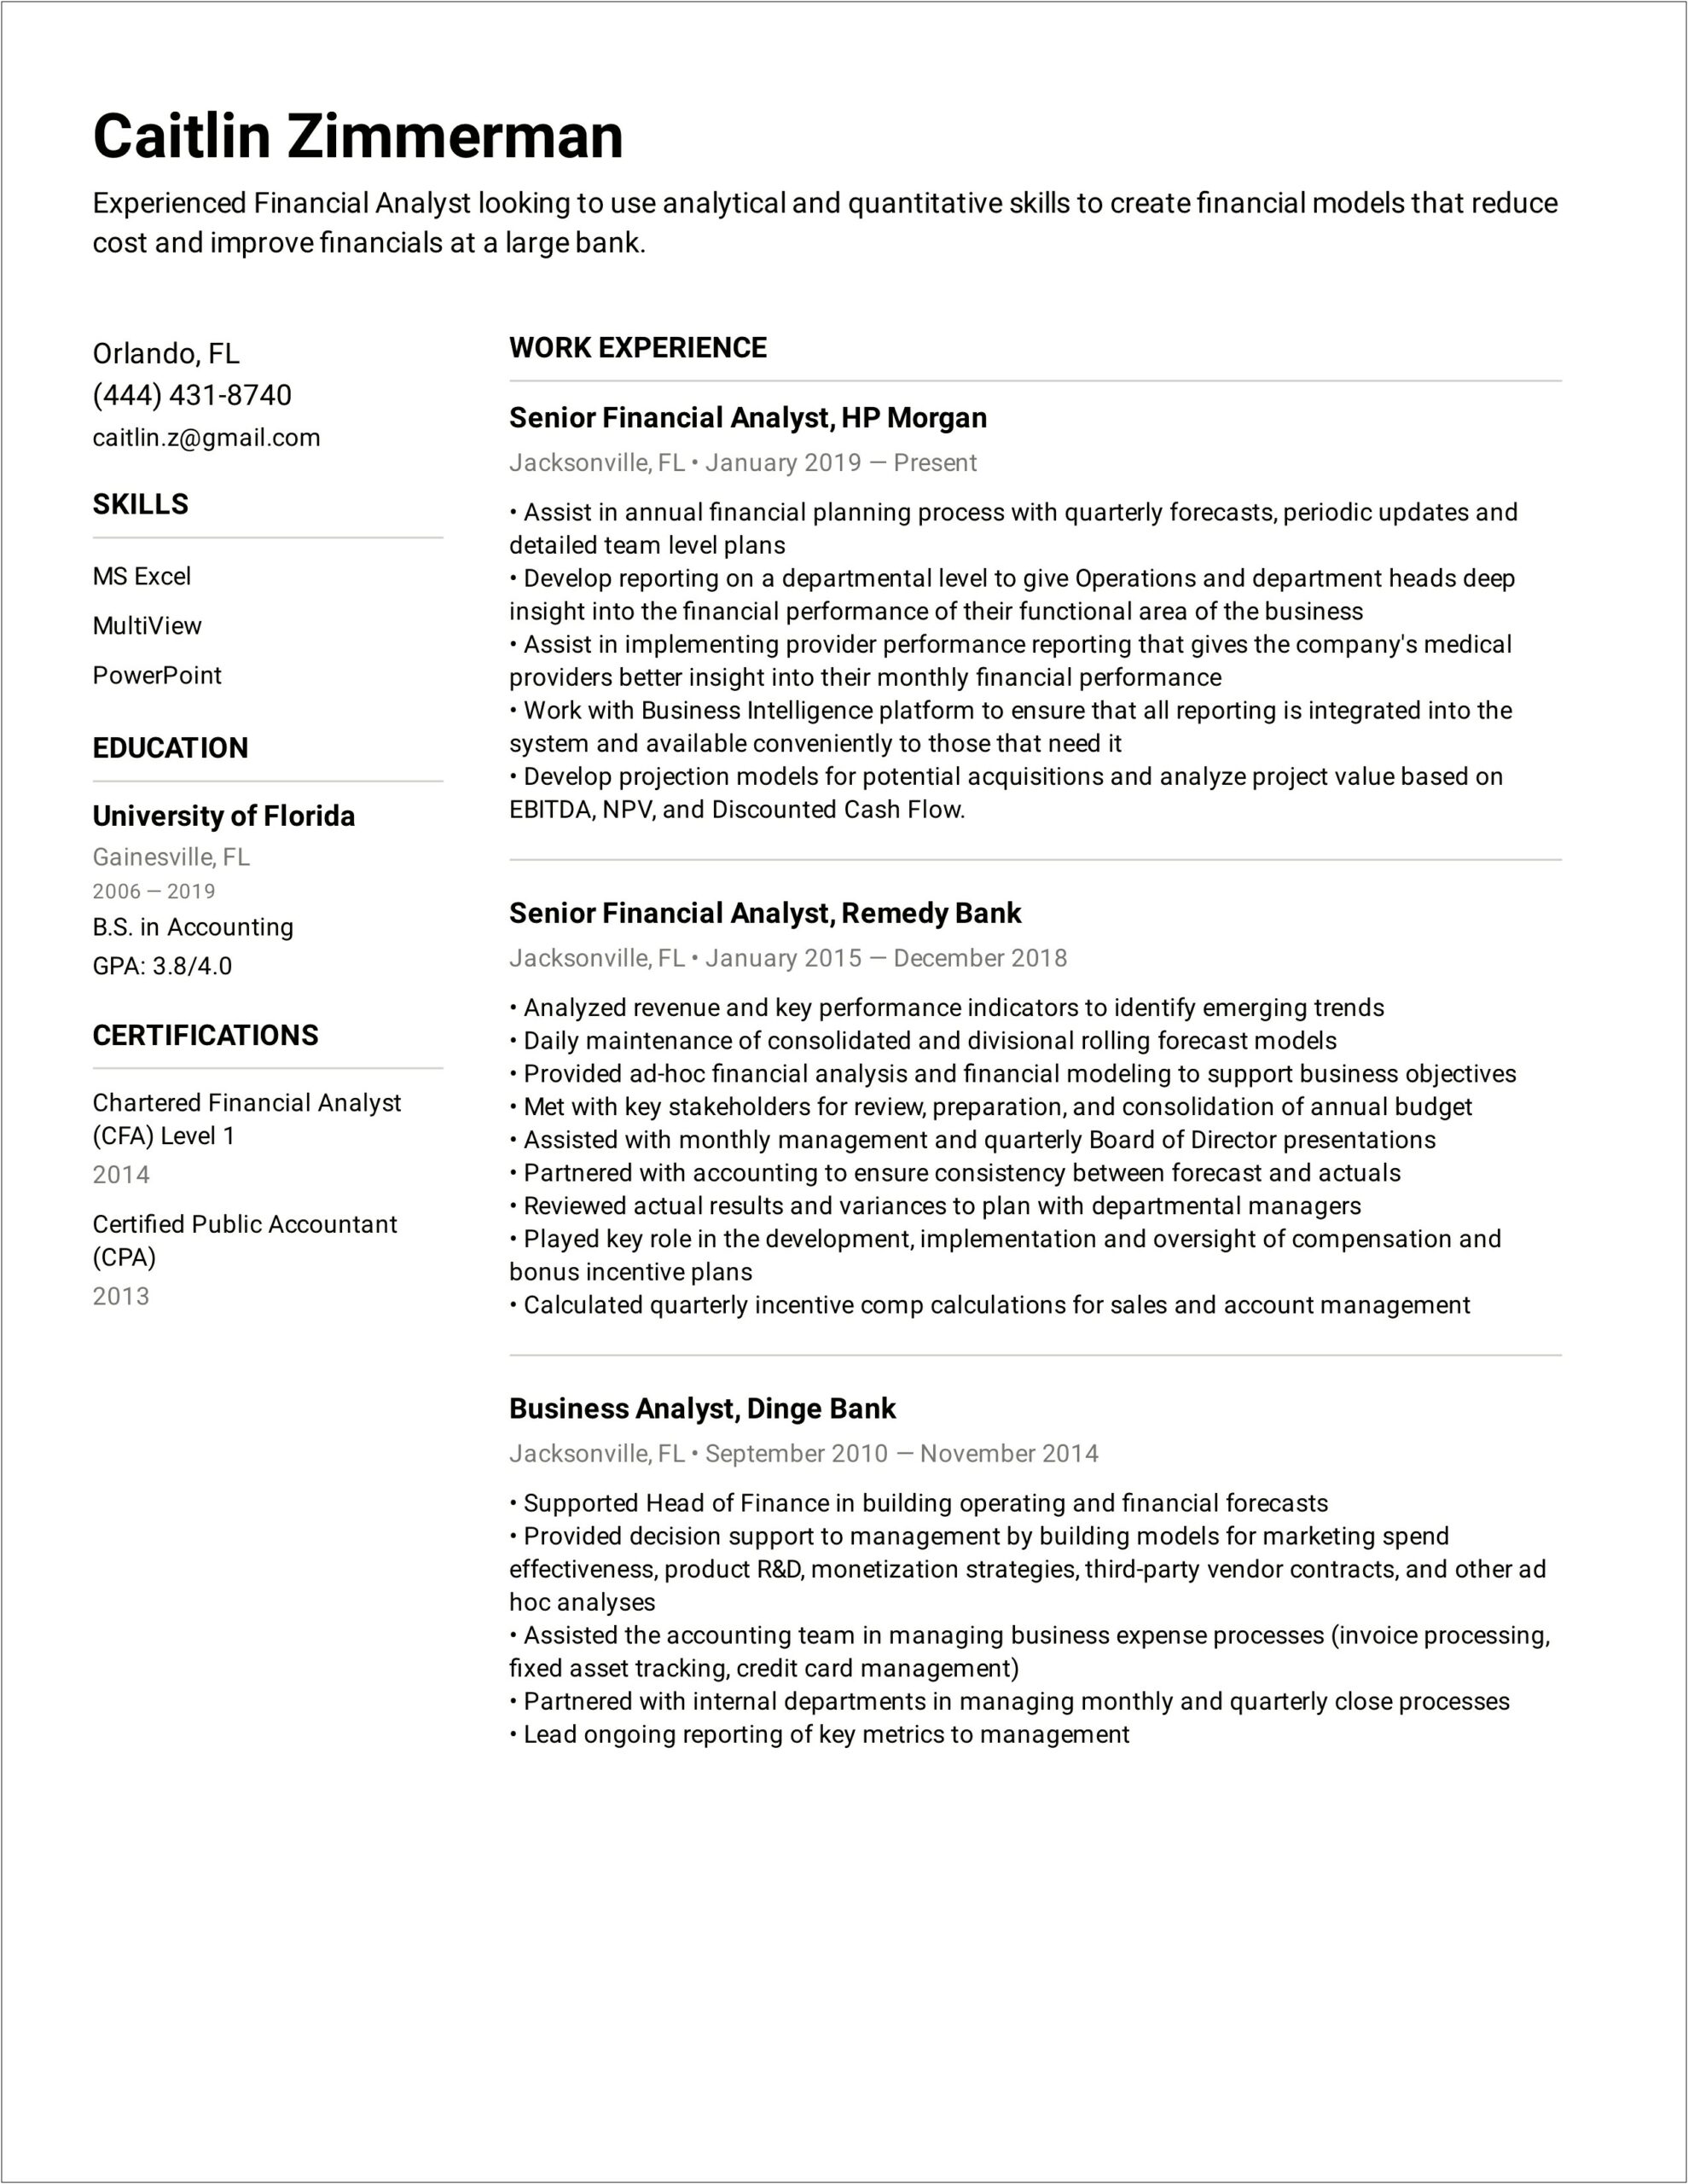 One Year Experience Resume For Ba